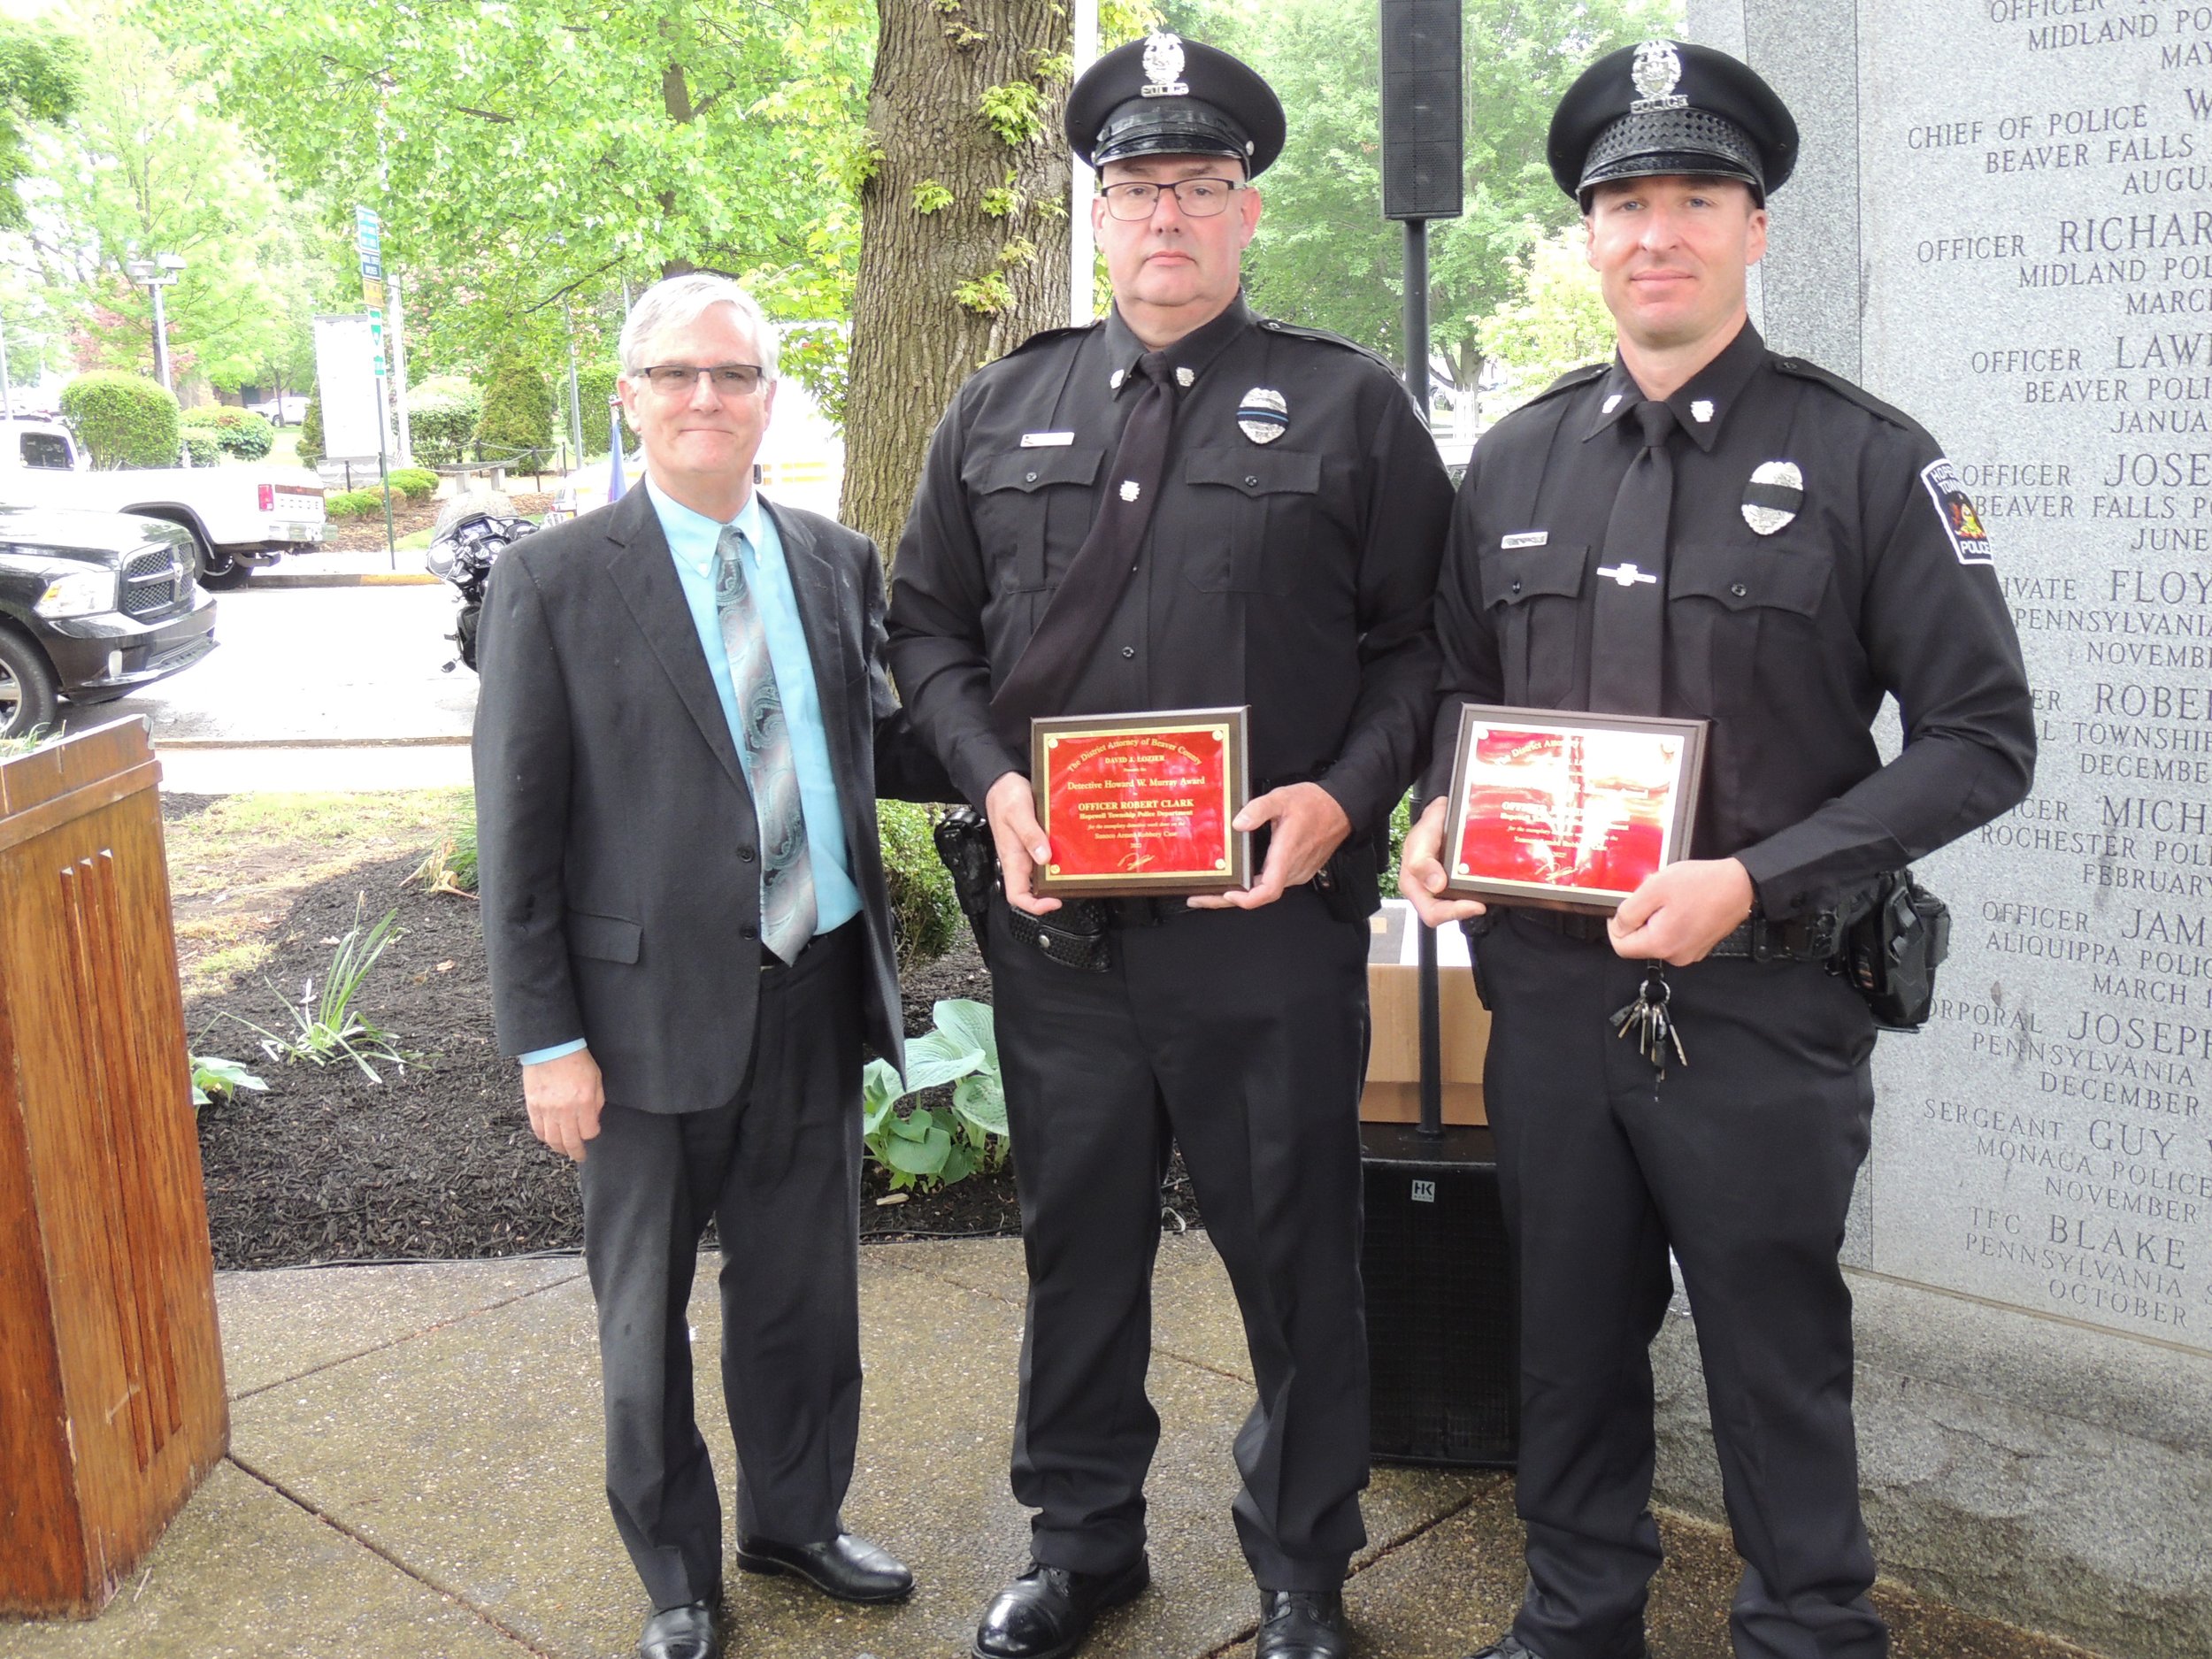 District Attorney David Lozier presents the Detective Howard Murray Award to Officer Robert Clark and Officer Jared Rogers, both from Hopewell Township Police Department.